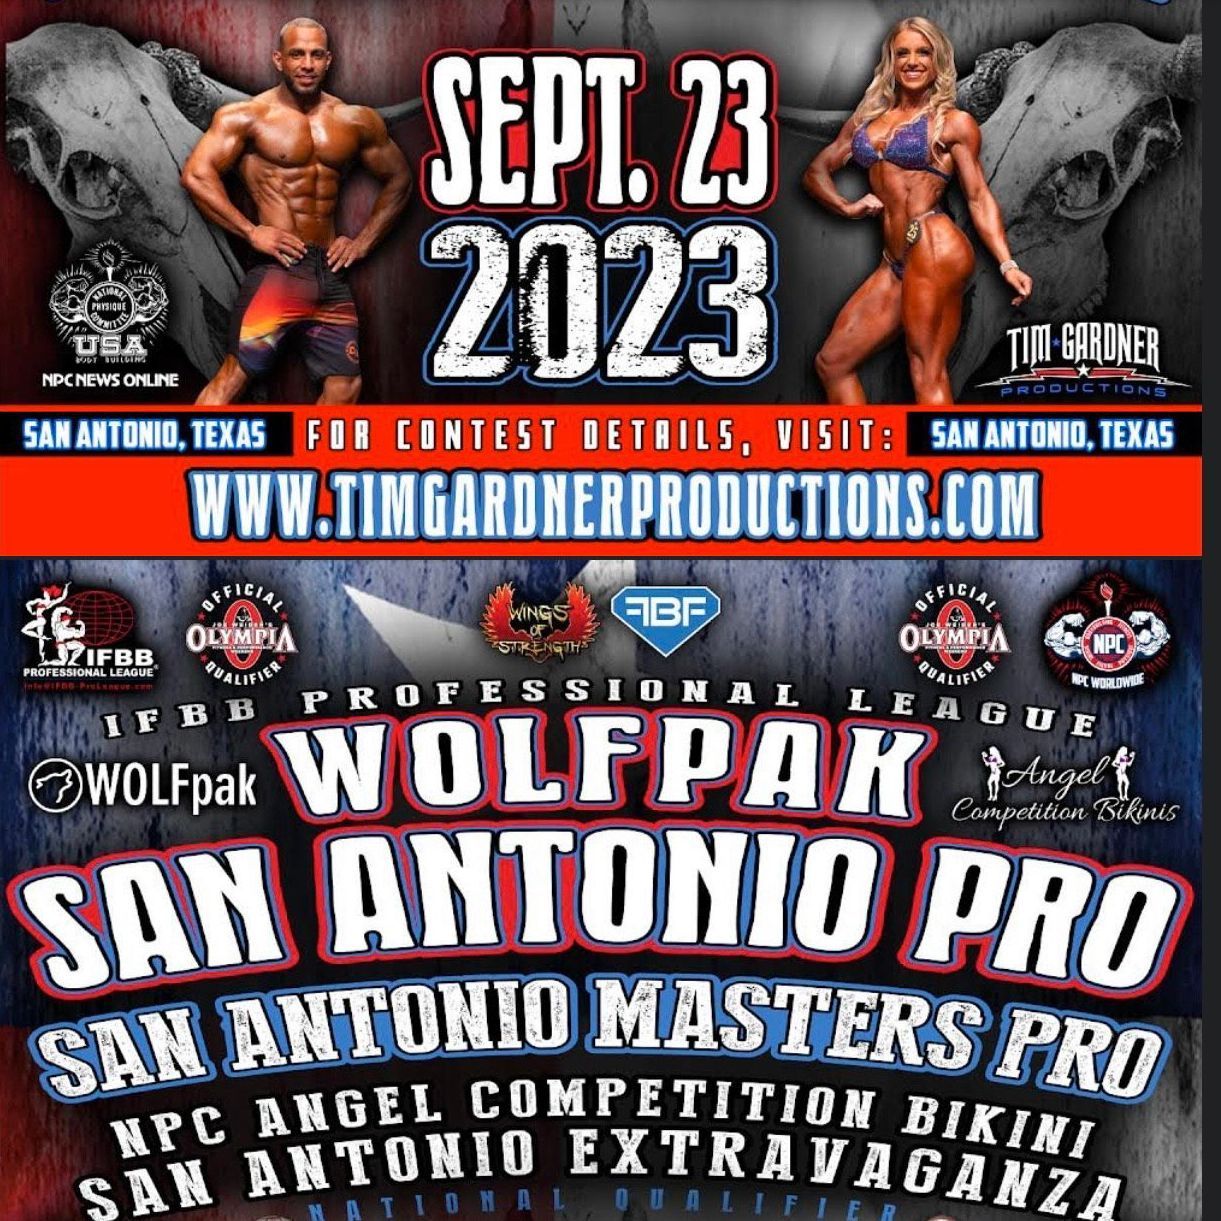 A poster for the wolfpak san antonio masters pro